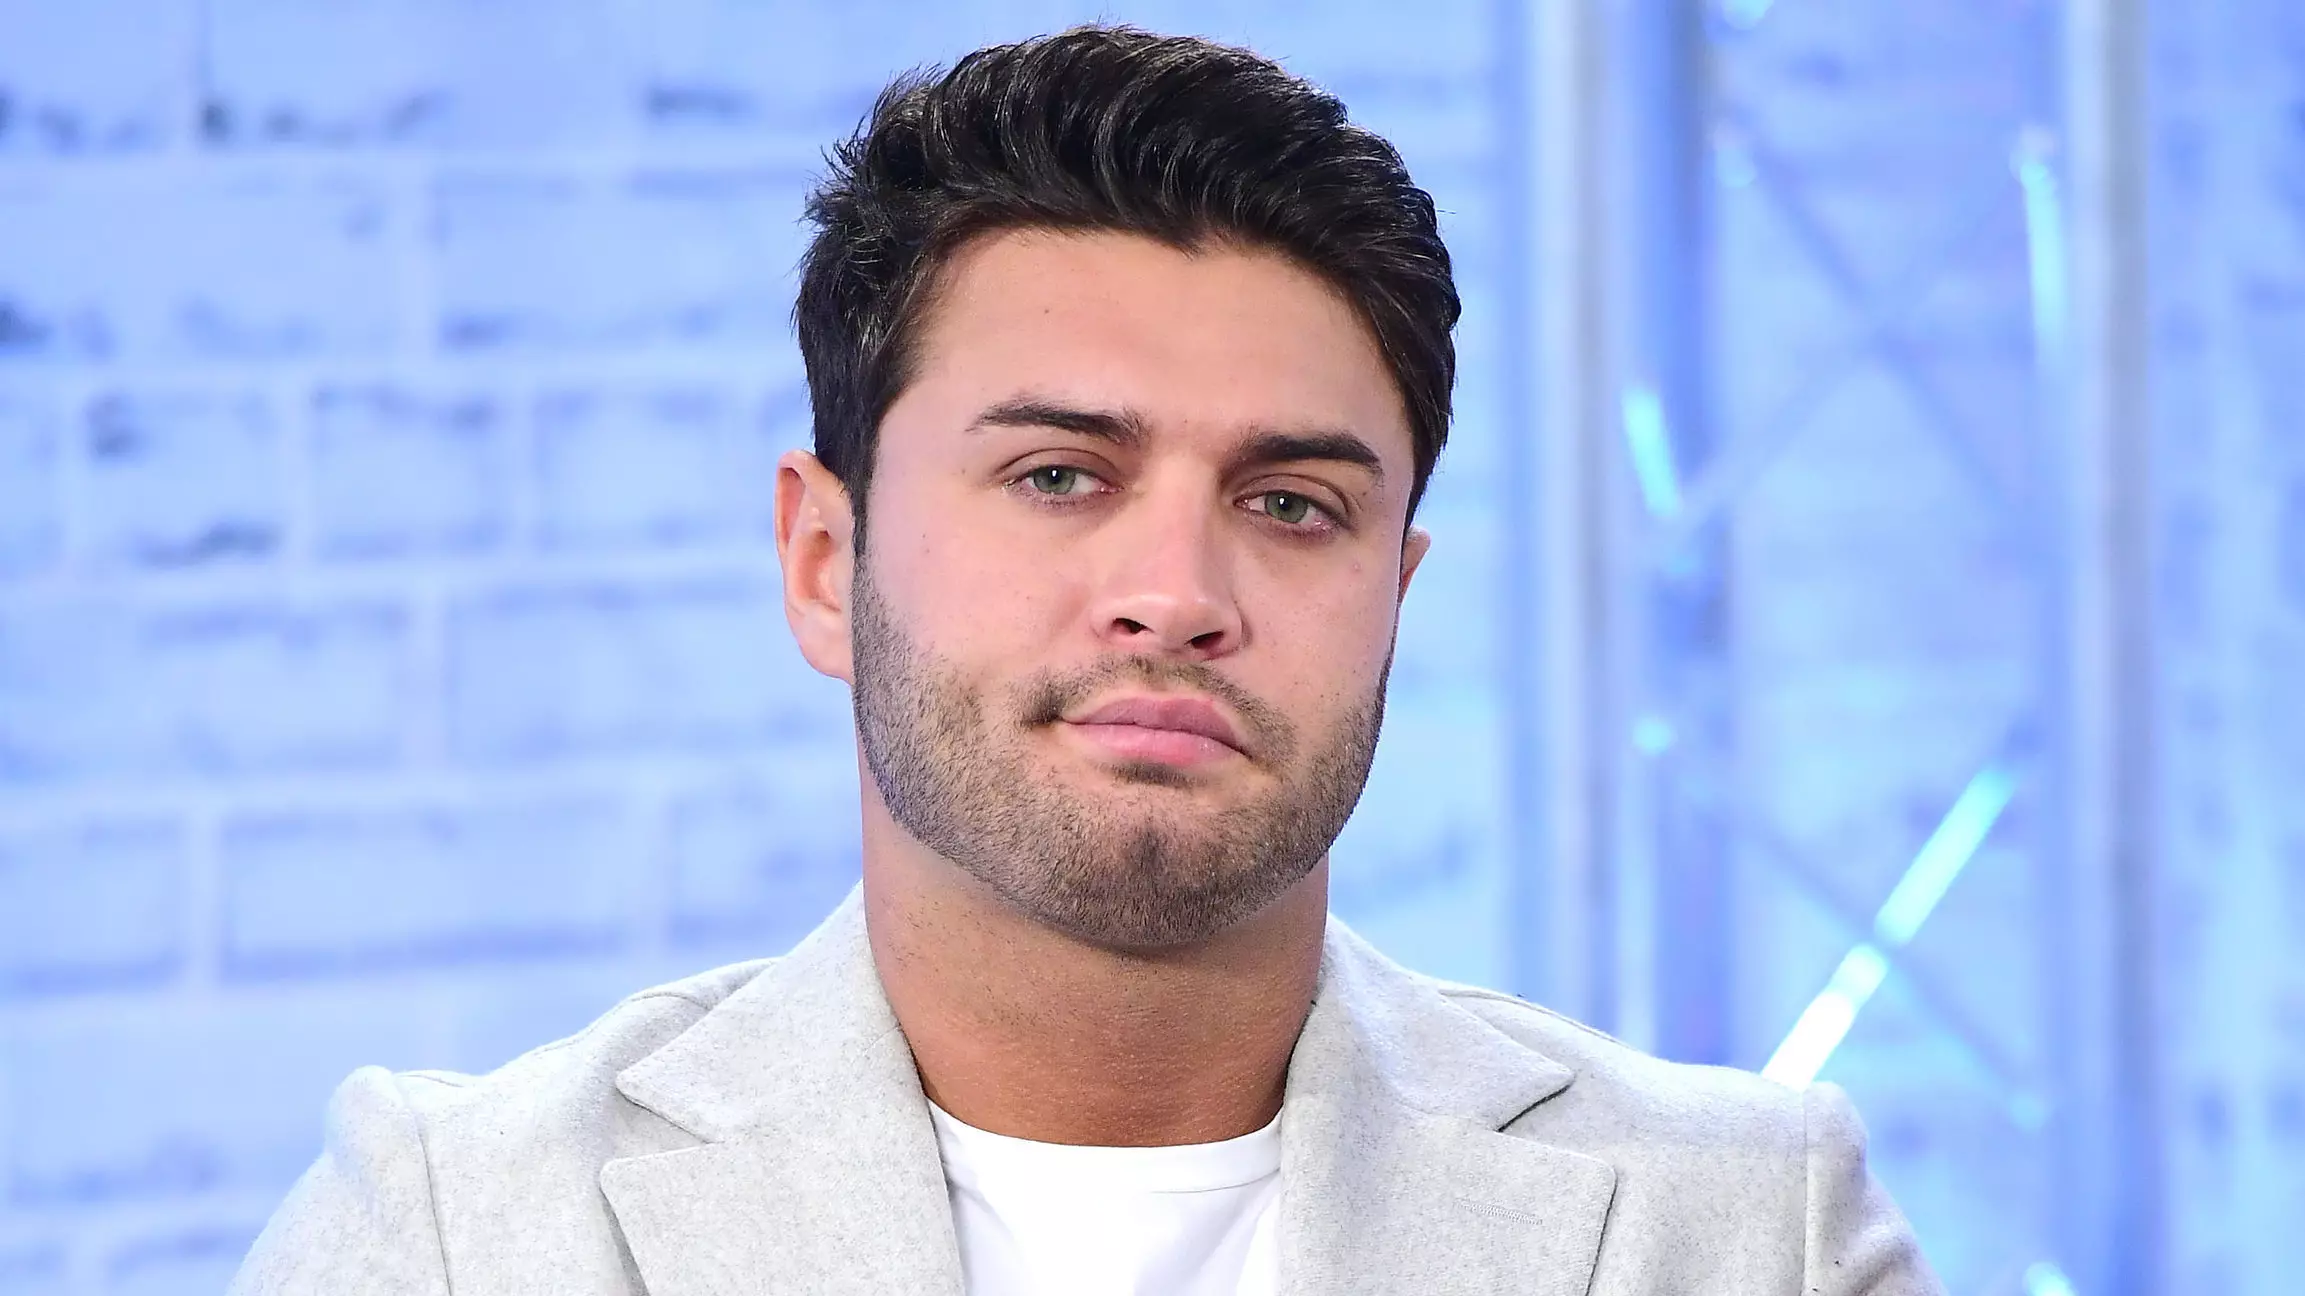 'Love Island' Stars Criticise Lack Of Support In Wake Of Mike Thalassitis' Death